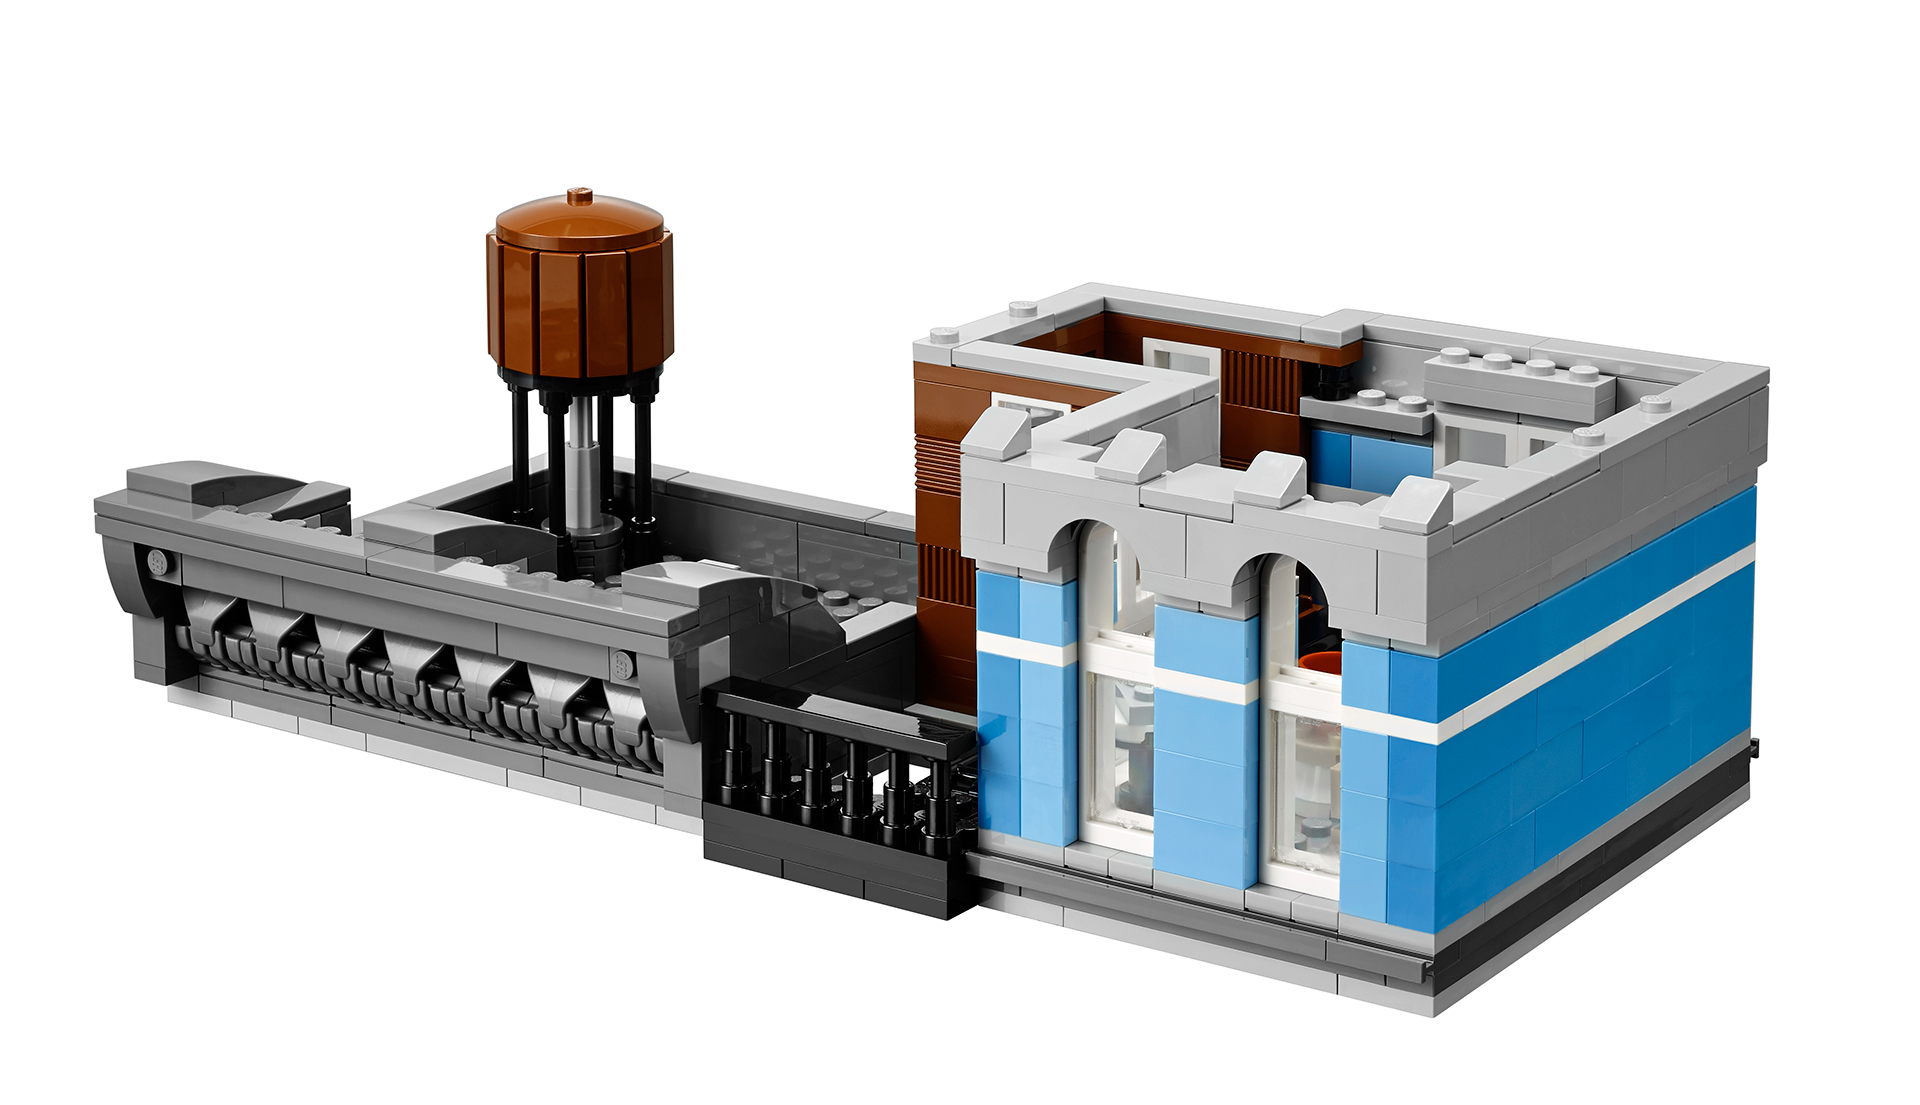 The LEGO Detective’s Office Has A Story To Tell